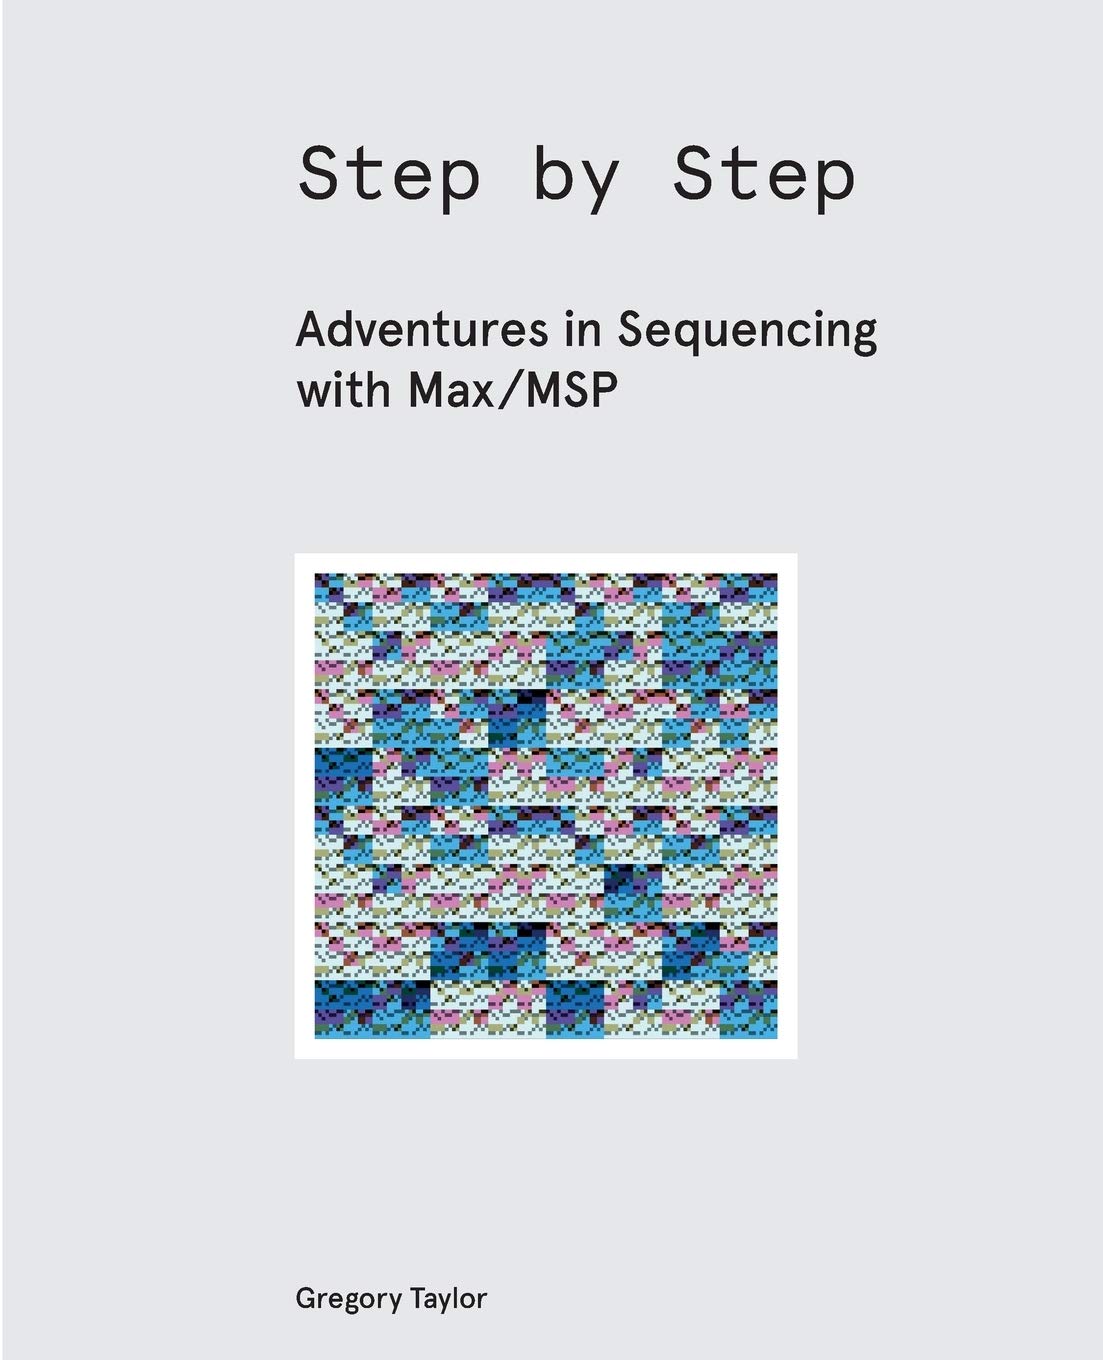 Step by Step: Adventures in Sequencing with Max/MSP by Gregory Taylor